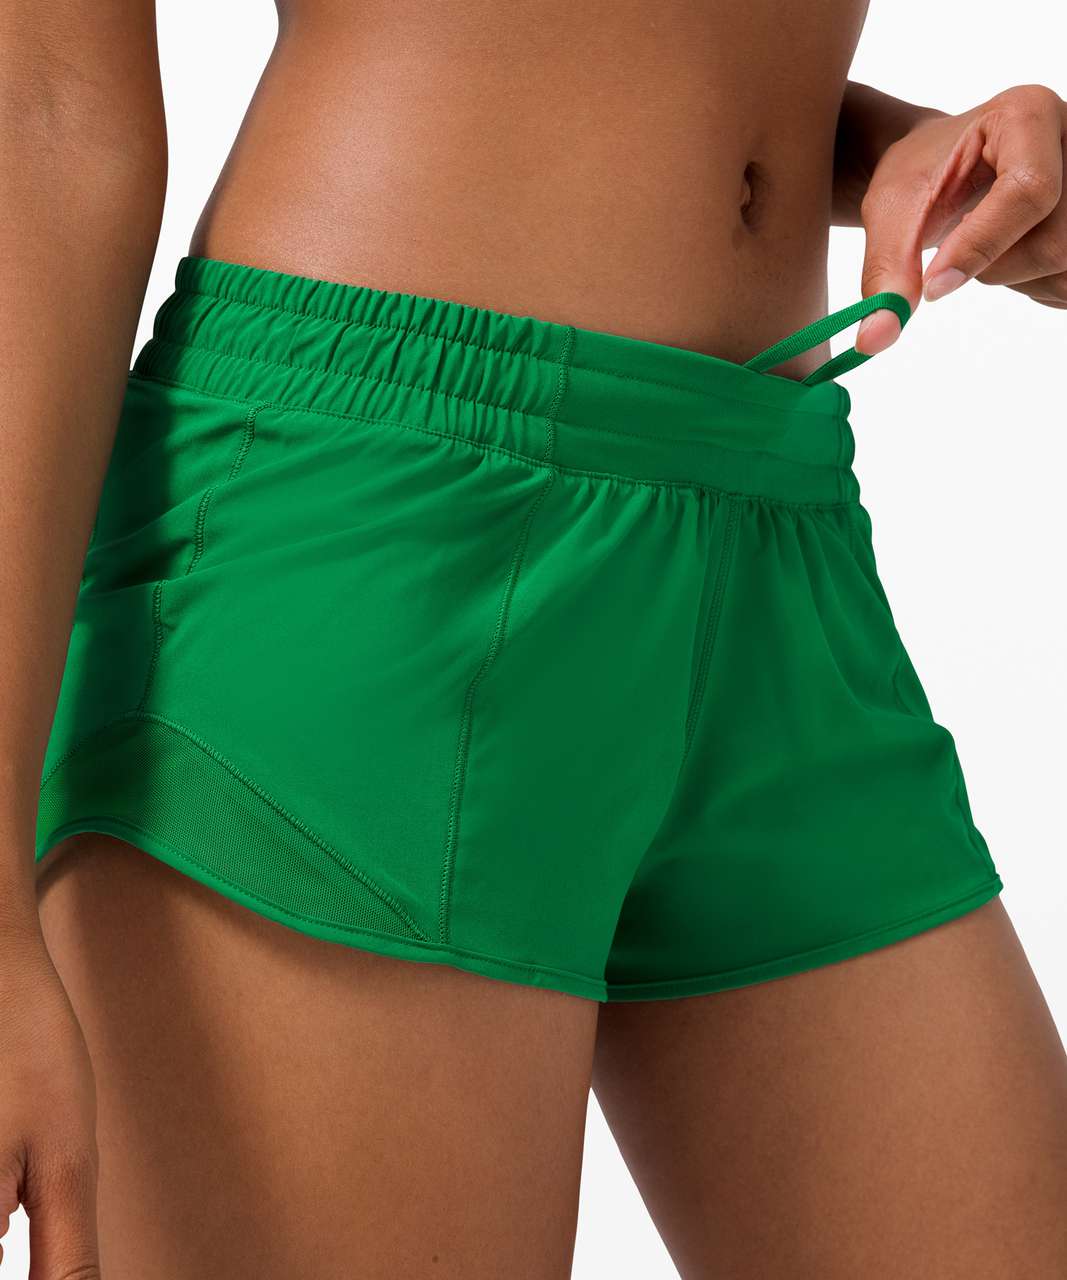 Lululemon 🍋 Kelly Green Hotty Hot Shorts in High Rise 2.5”. Size